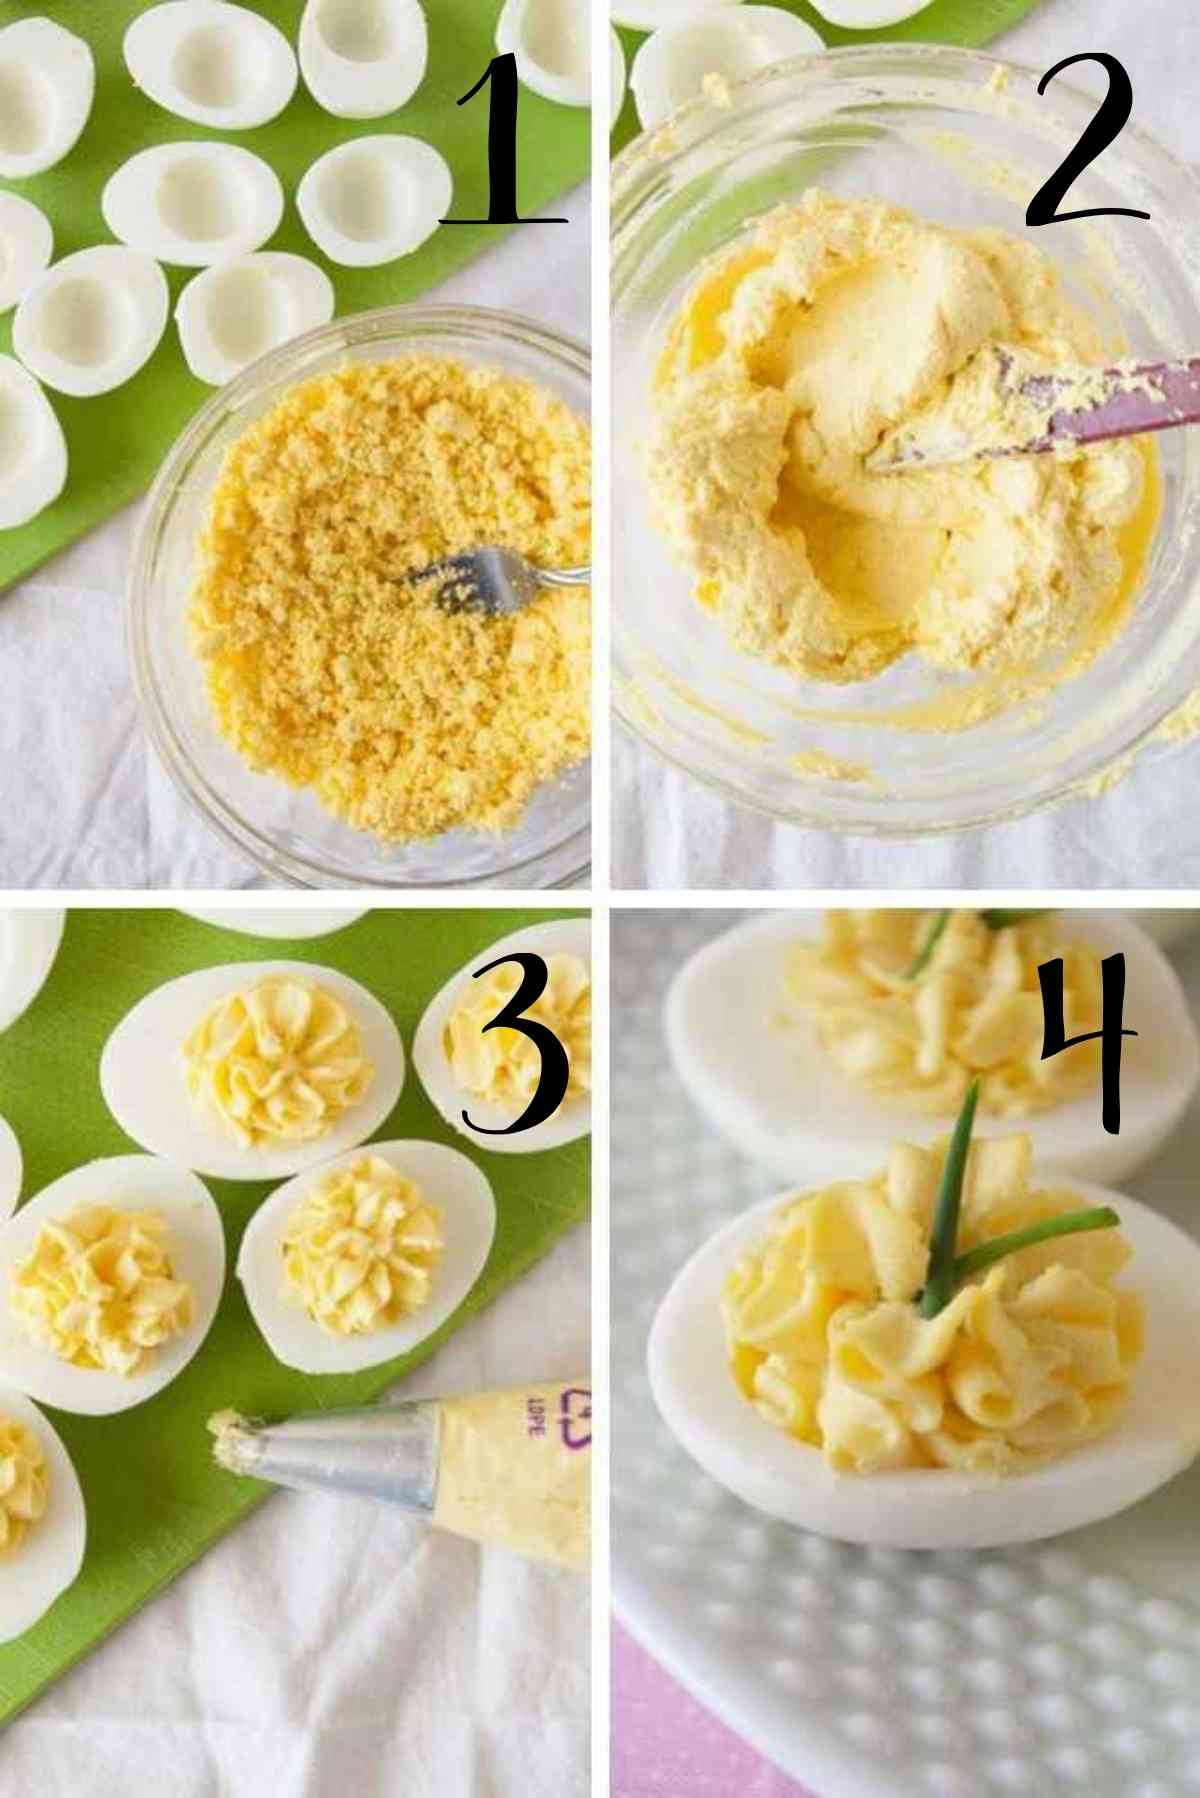 Mash egg yolks, mix in other ingredients and pipe the mixture into the egg whites!